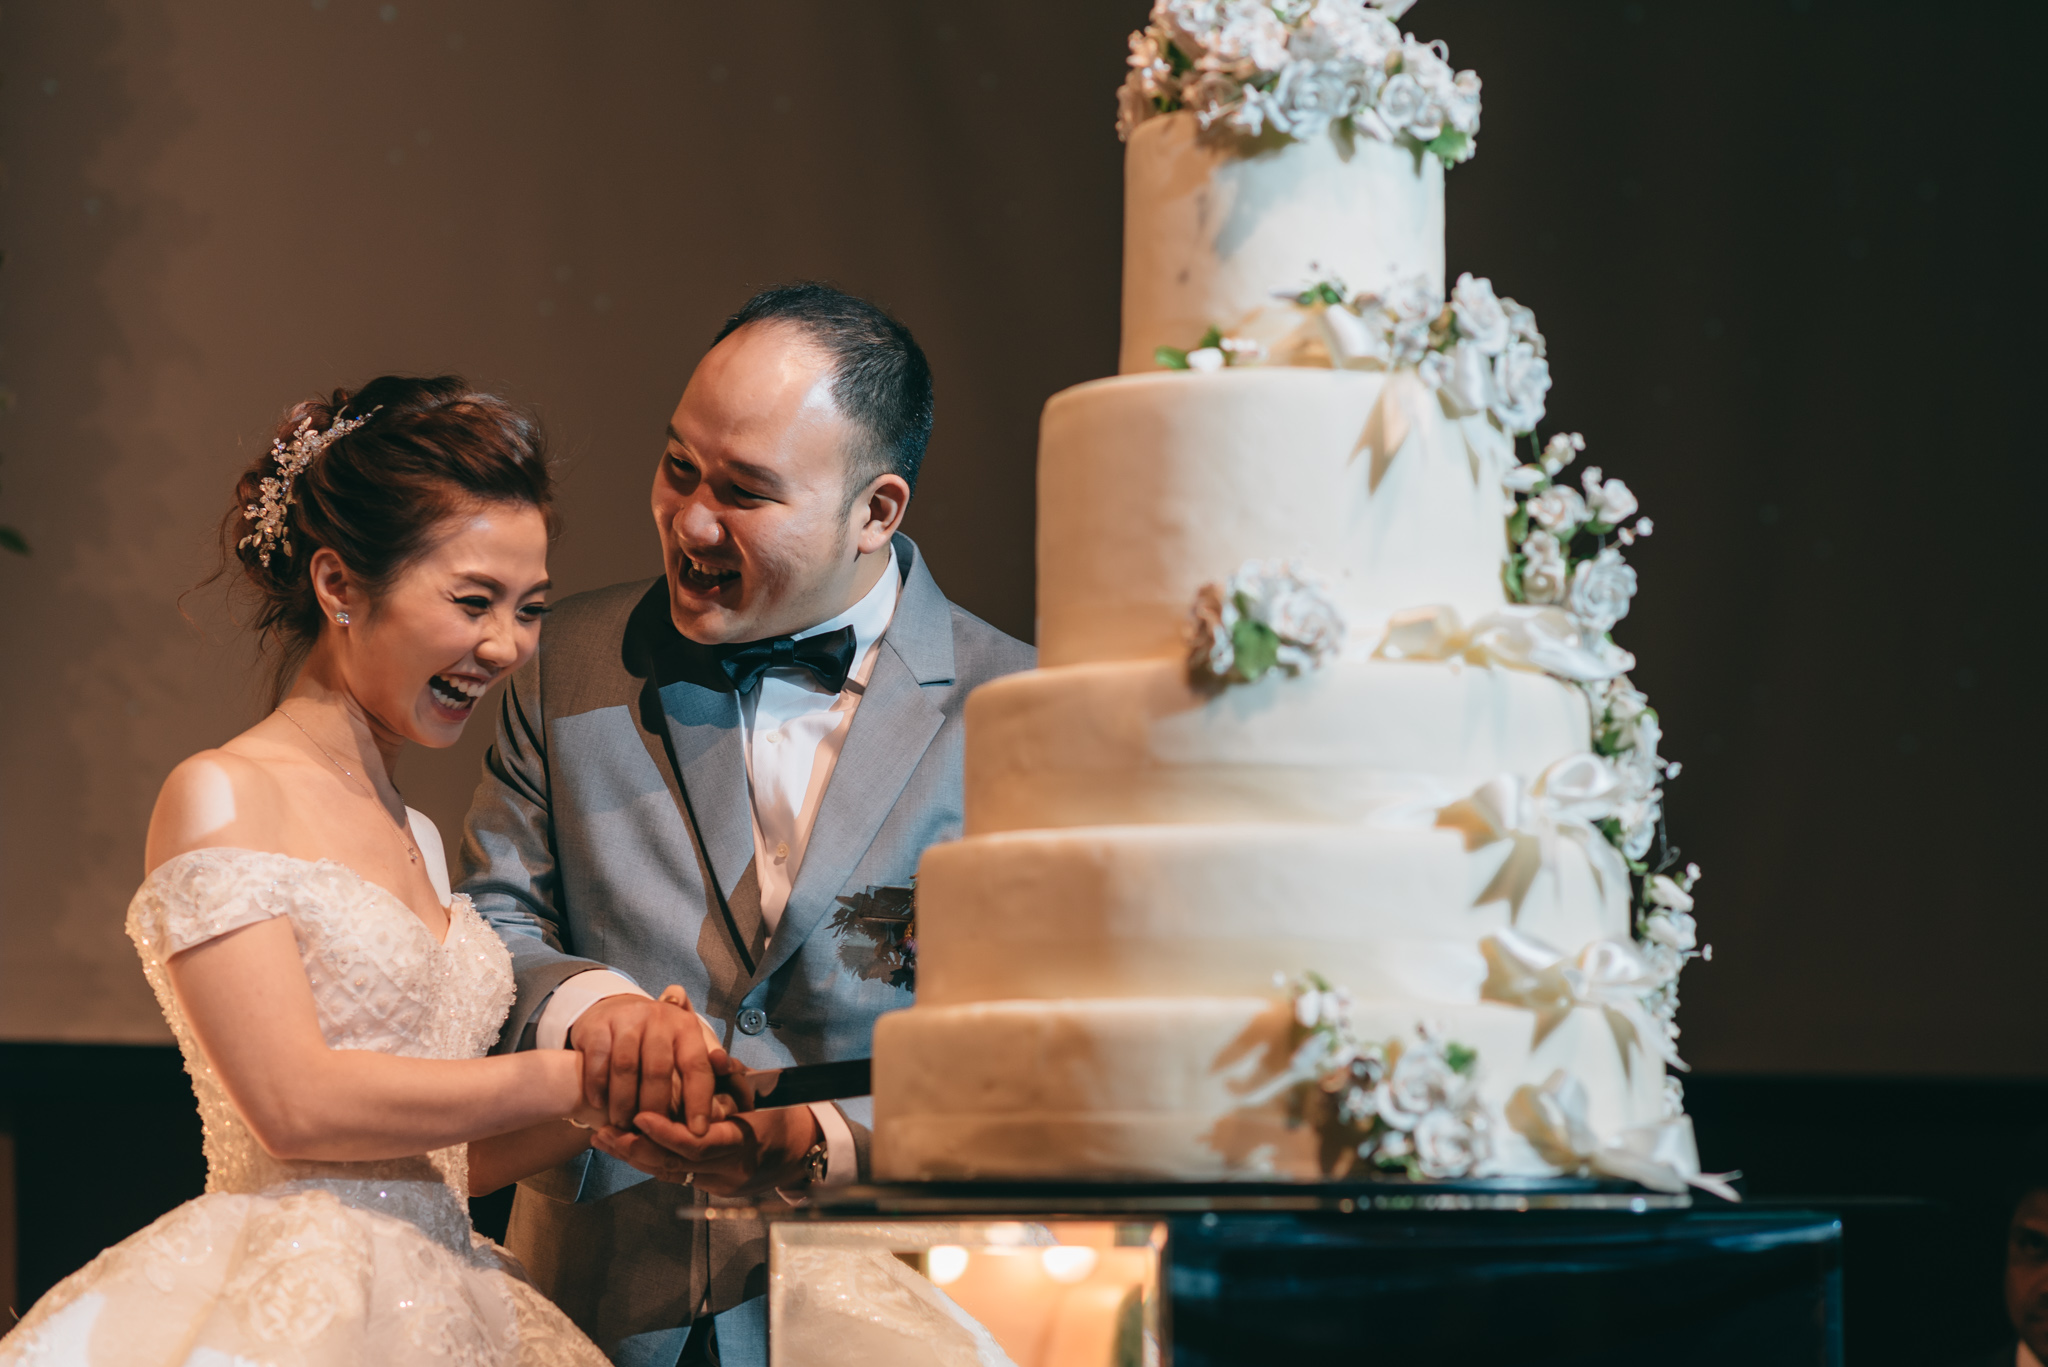 Eunice & Winshire Wedding Day Highlights (resized for sharing) - 187.jpg